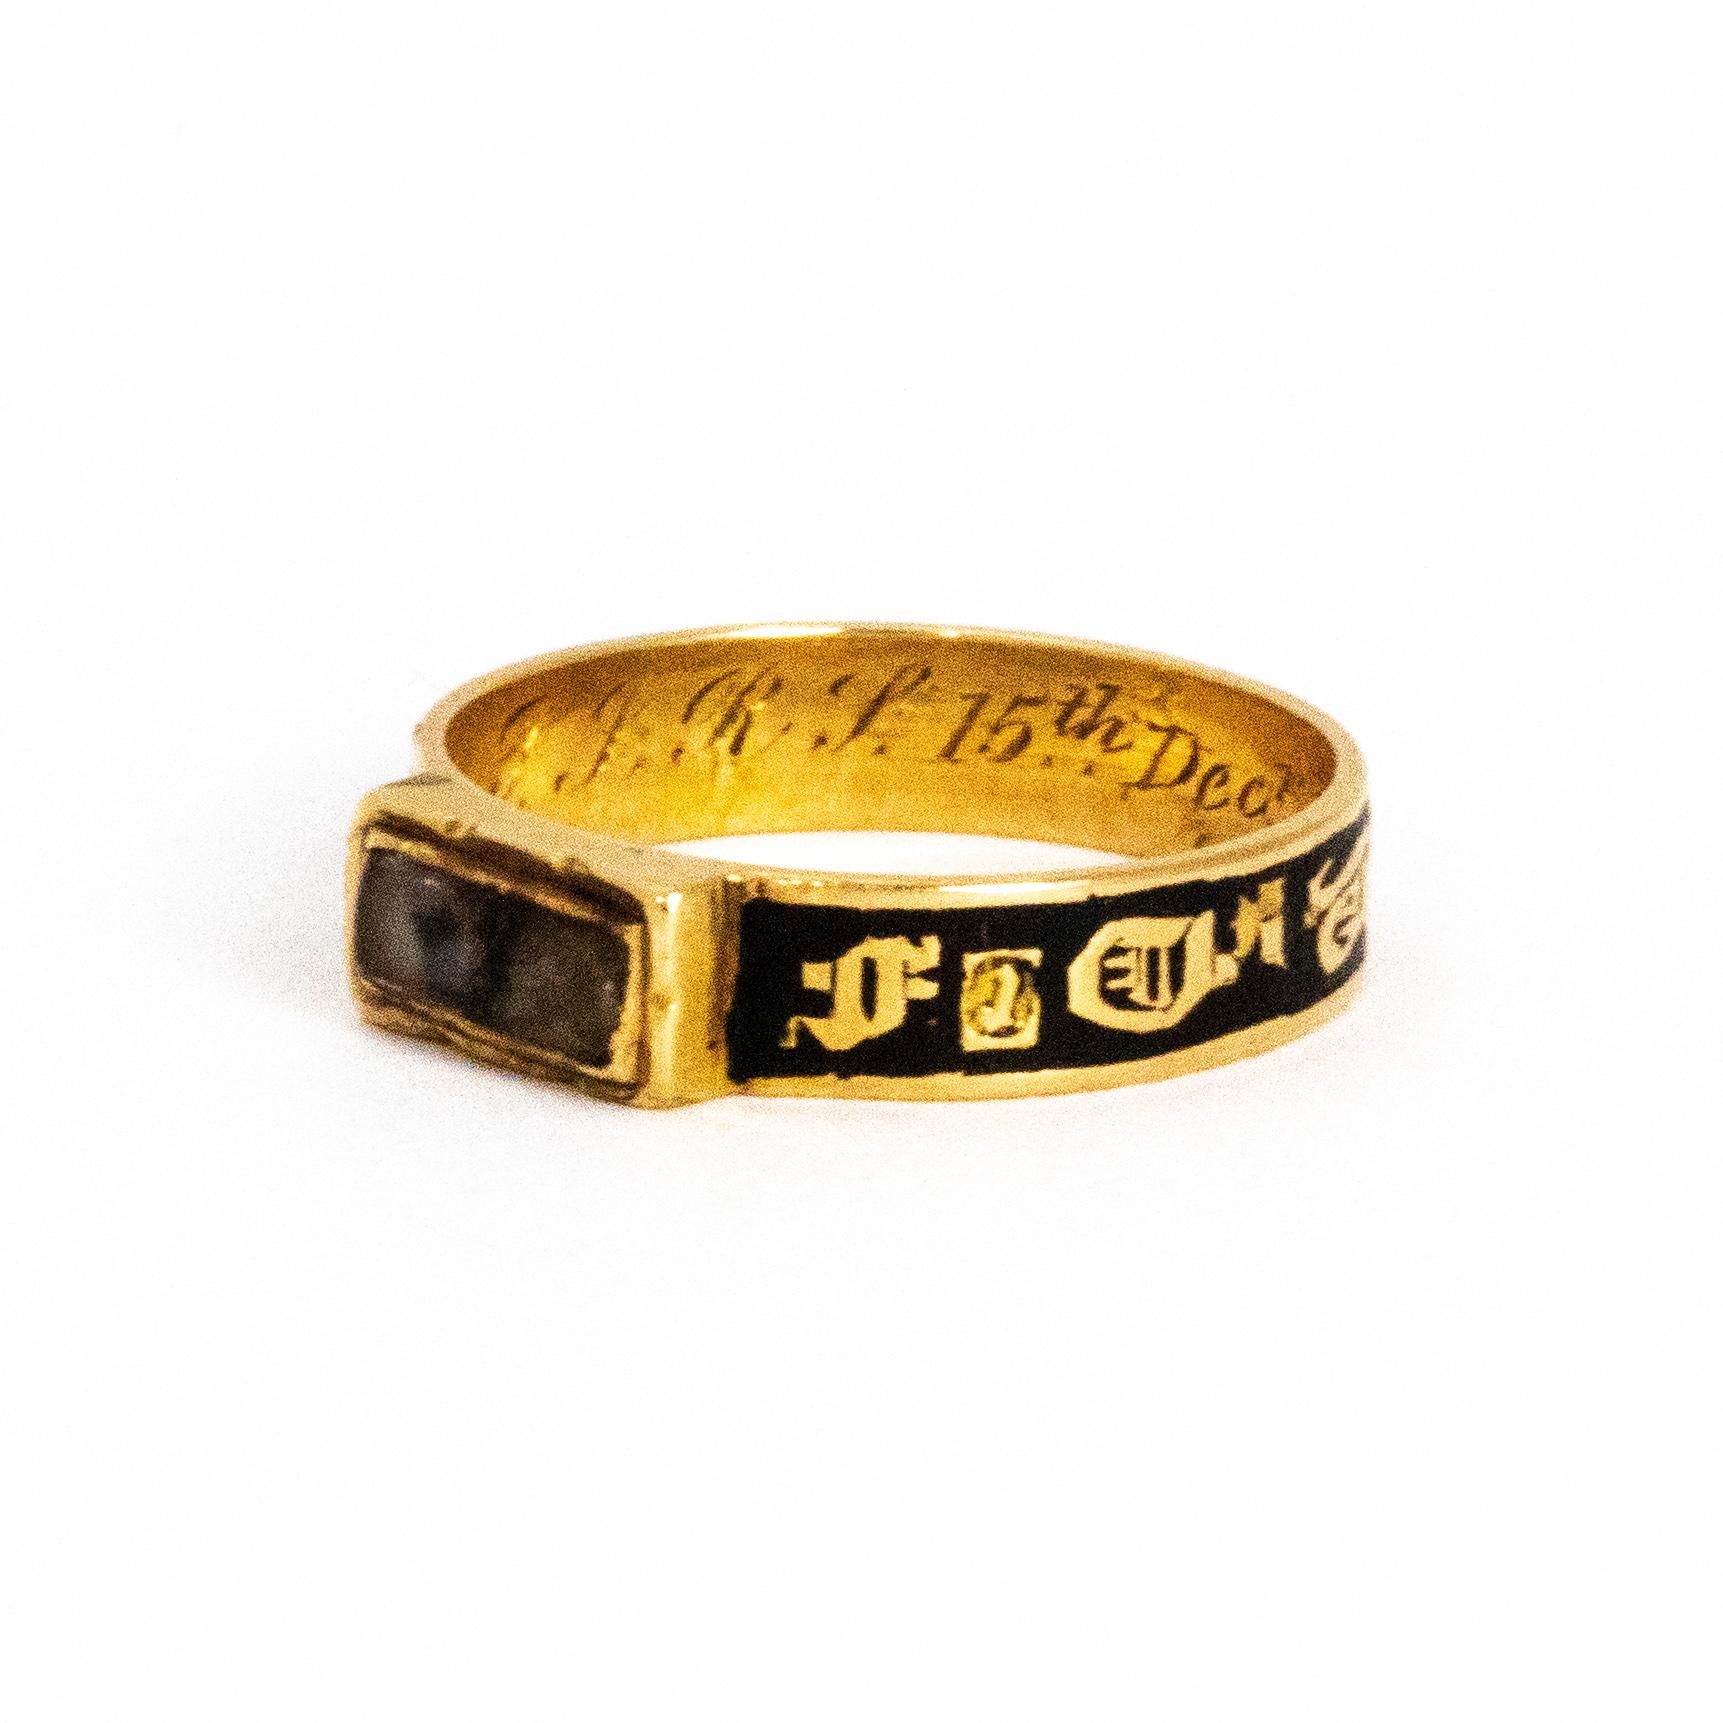 What a wonderful example of a Victorian mourning ring this is! The ring is modelled out of 18ct gold and black enamel and features a glazed locket front. The inner of the ring is engraved, reading 